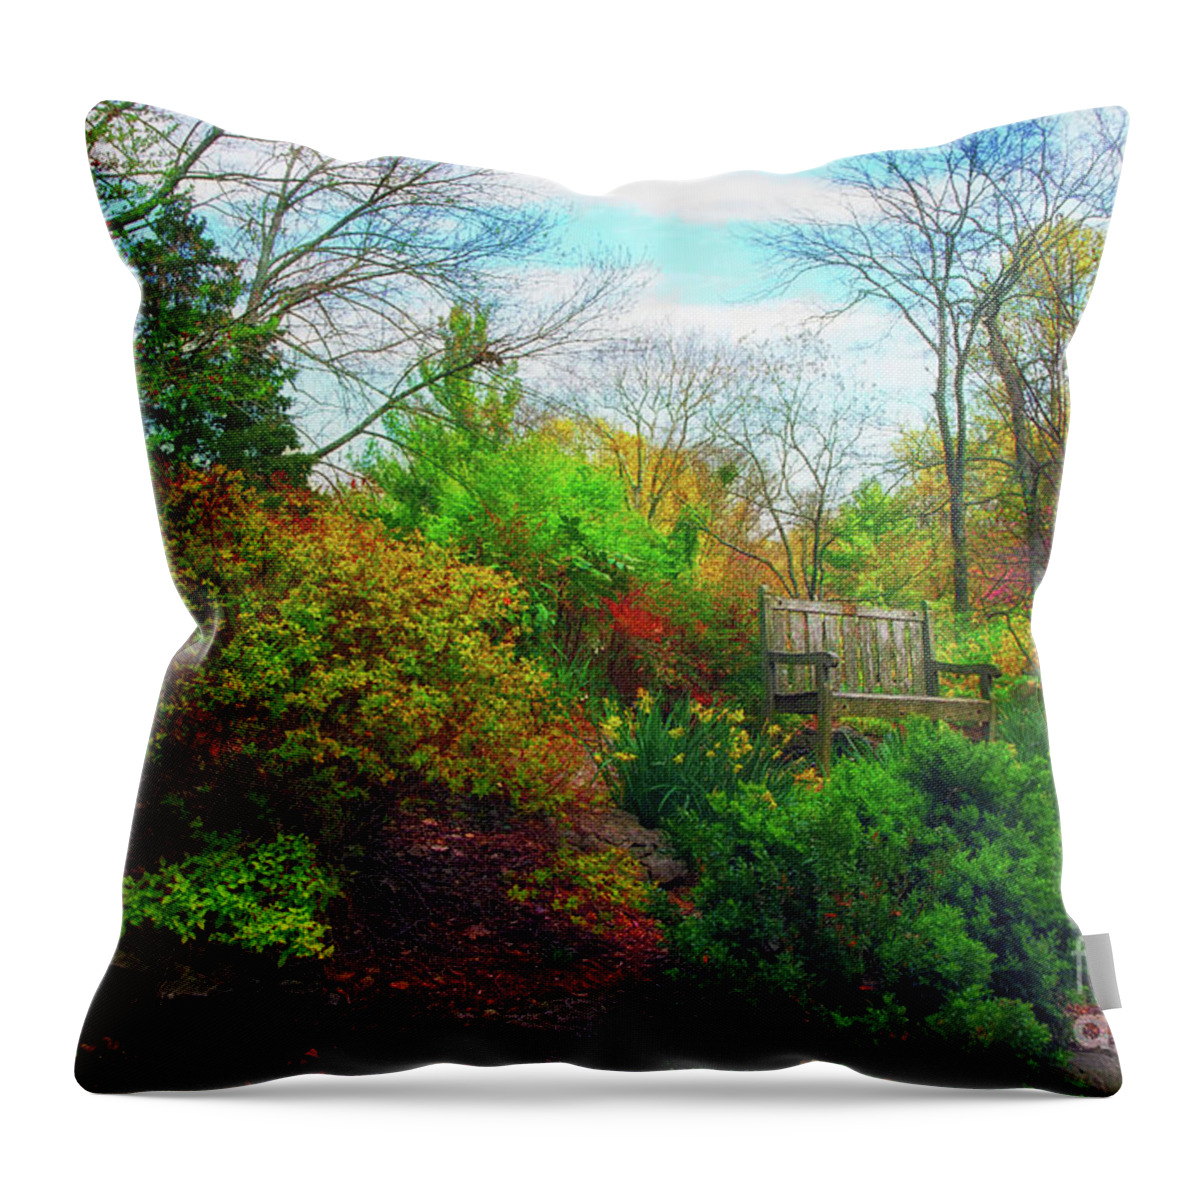 Landscape Throw Pillow featuring the photograph The Bench by Geraldine DeBoer